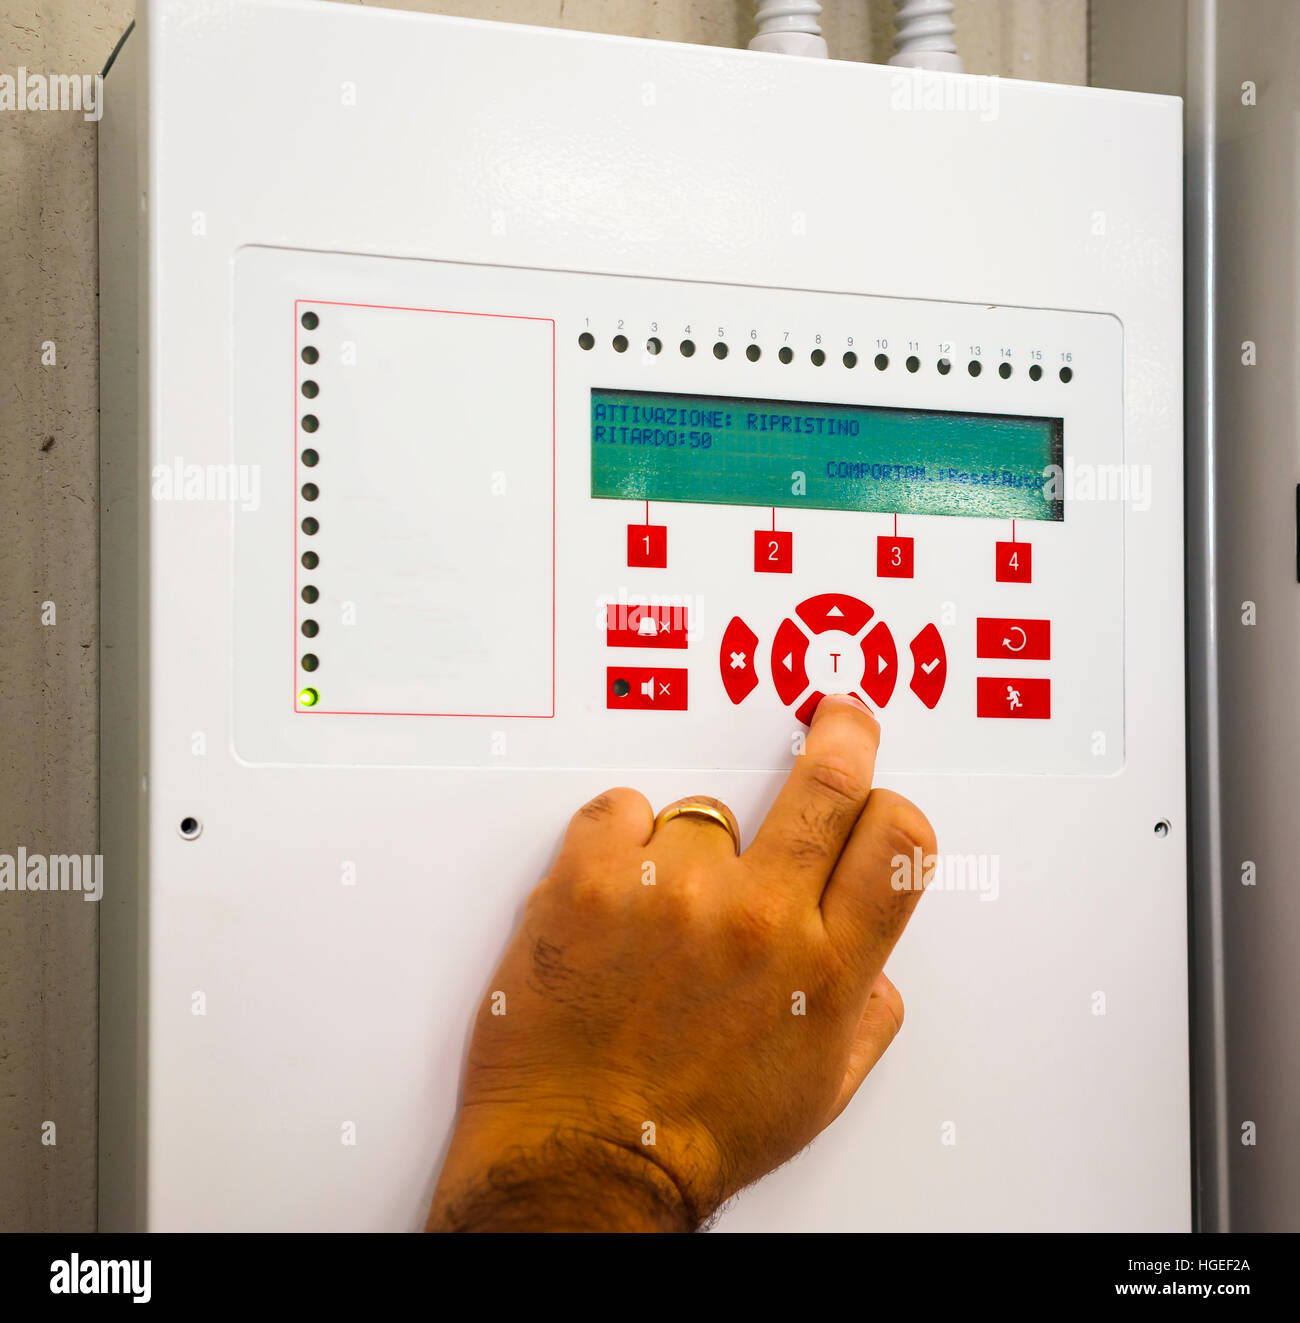 A technician works box panel system fire or smoke alarm Stock Photo